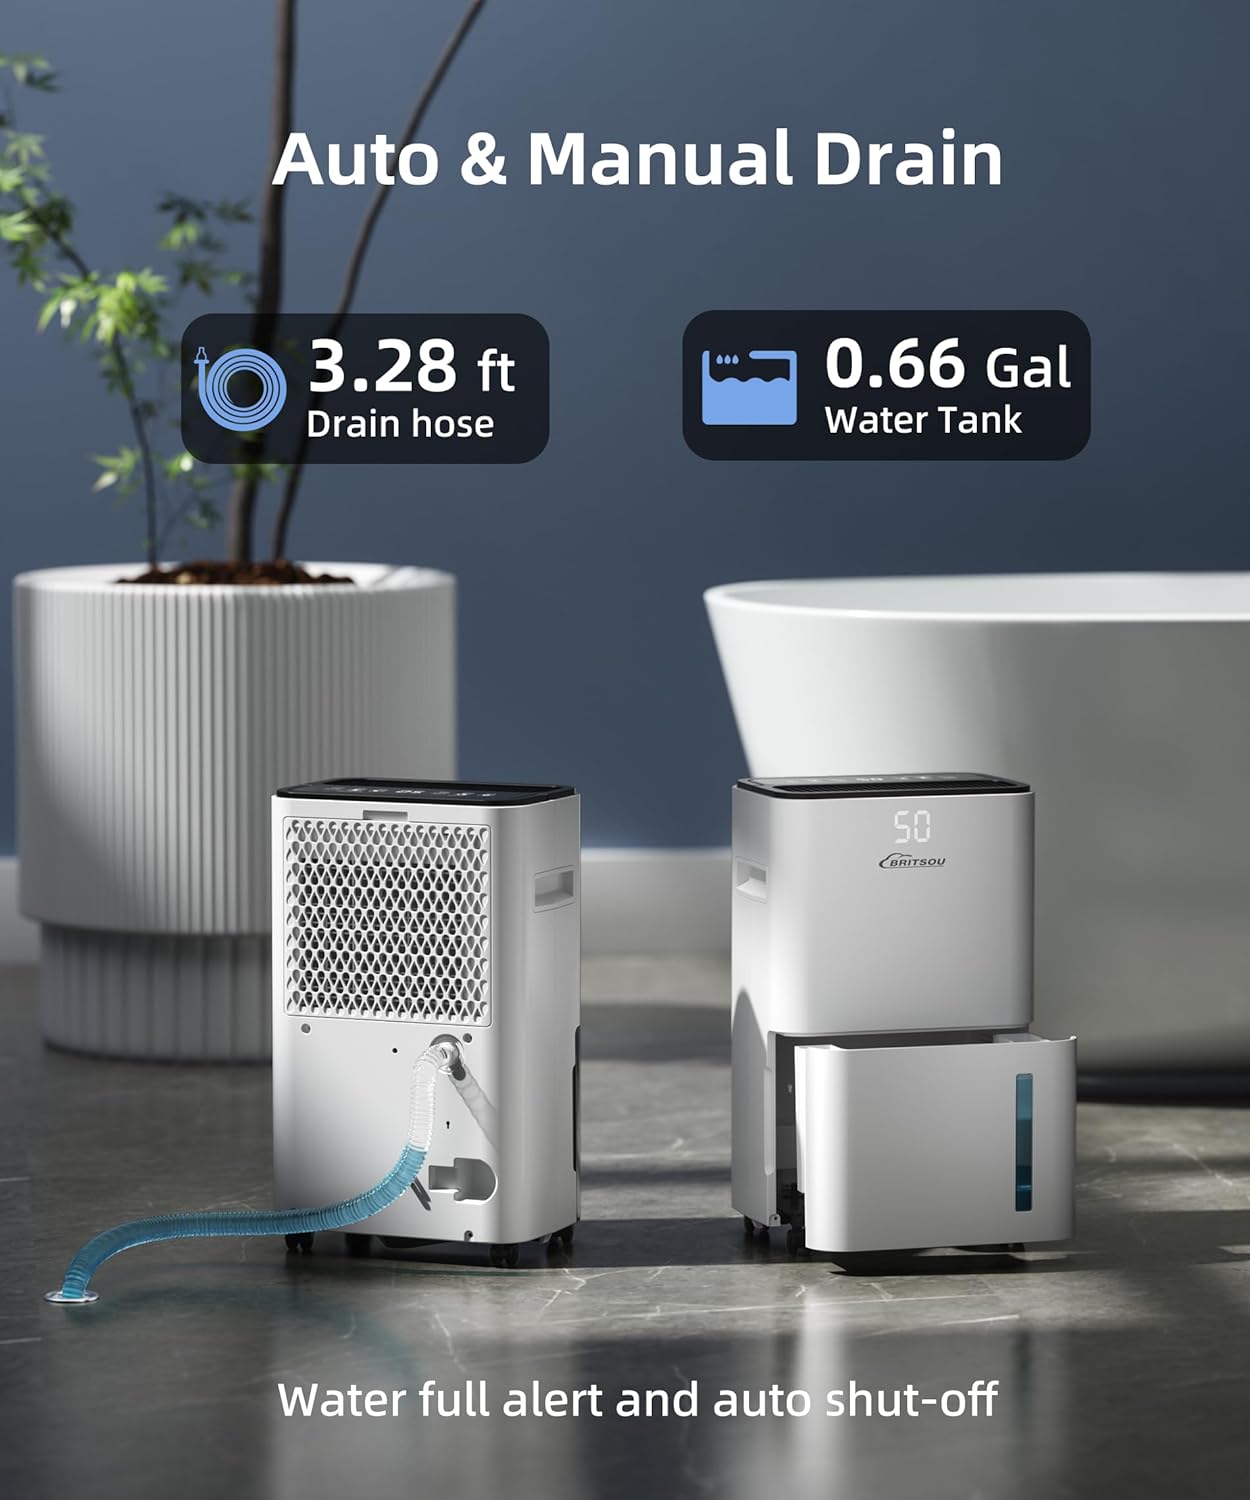 Dehumidifier 2500 Sq. Ft 30 Pint BRITSOU Dehumidifiers for Home Basements Bedroom Bathroom with Drain Hose | Quiet Dehumidifier for Medium to Large Room | Dry Clothes Mode | Intelligent Humidity Control with 24HR Timer